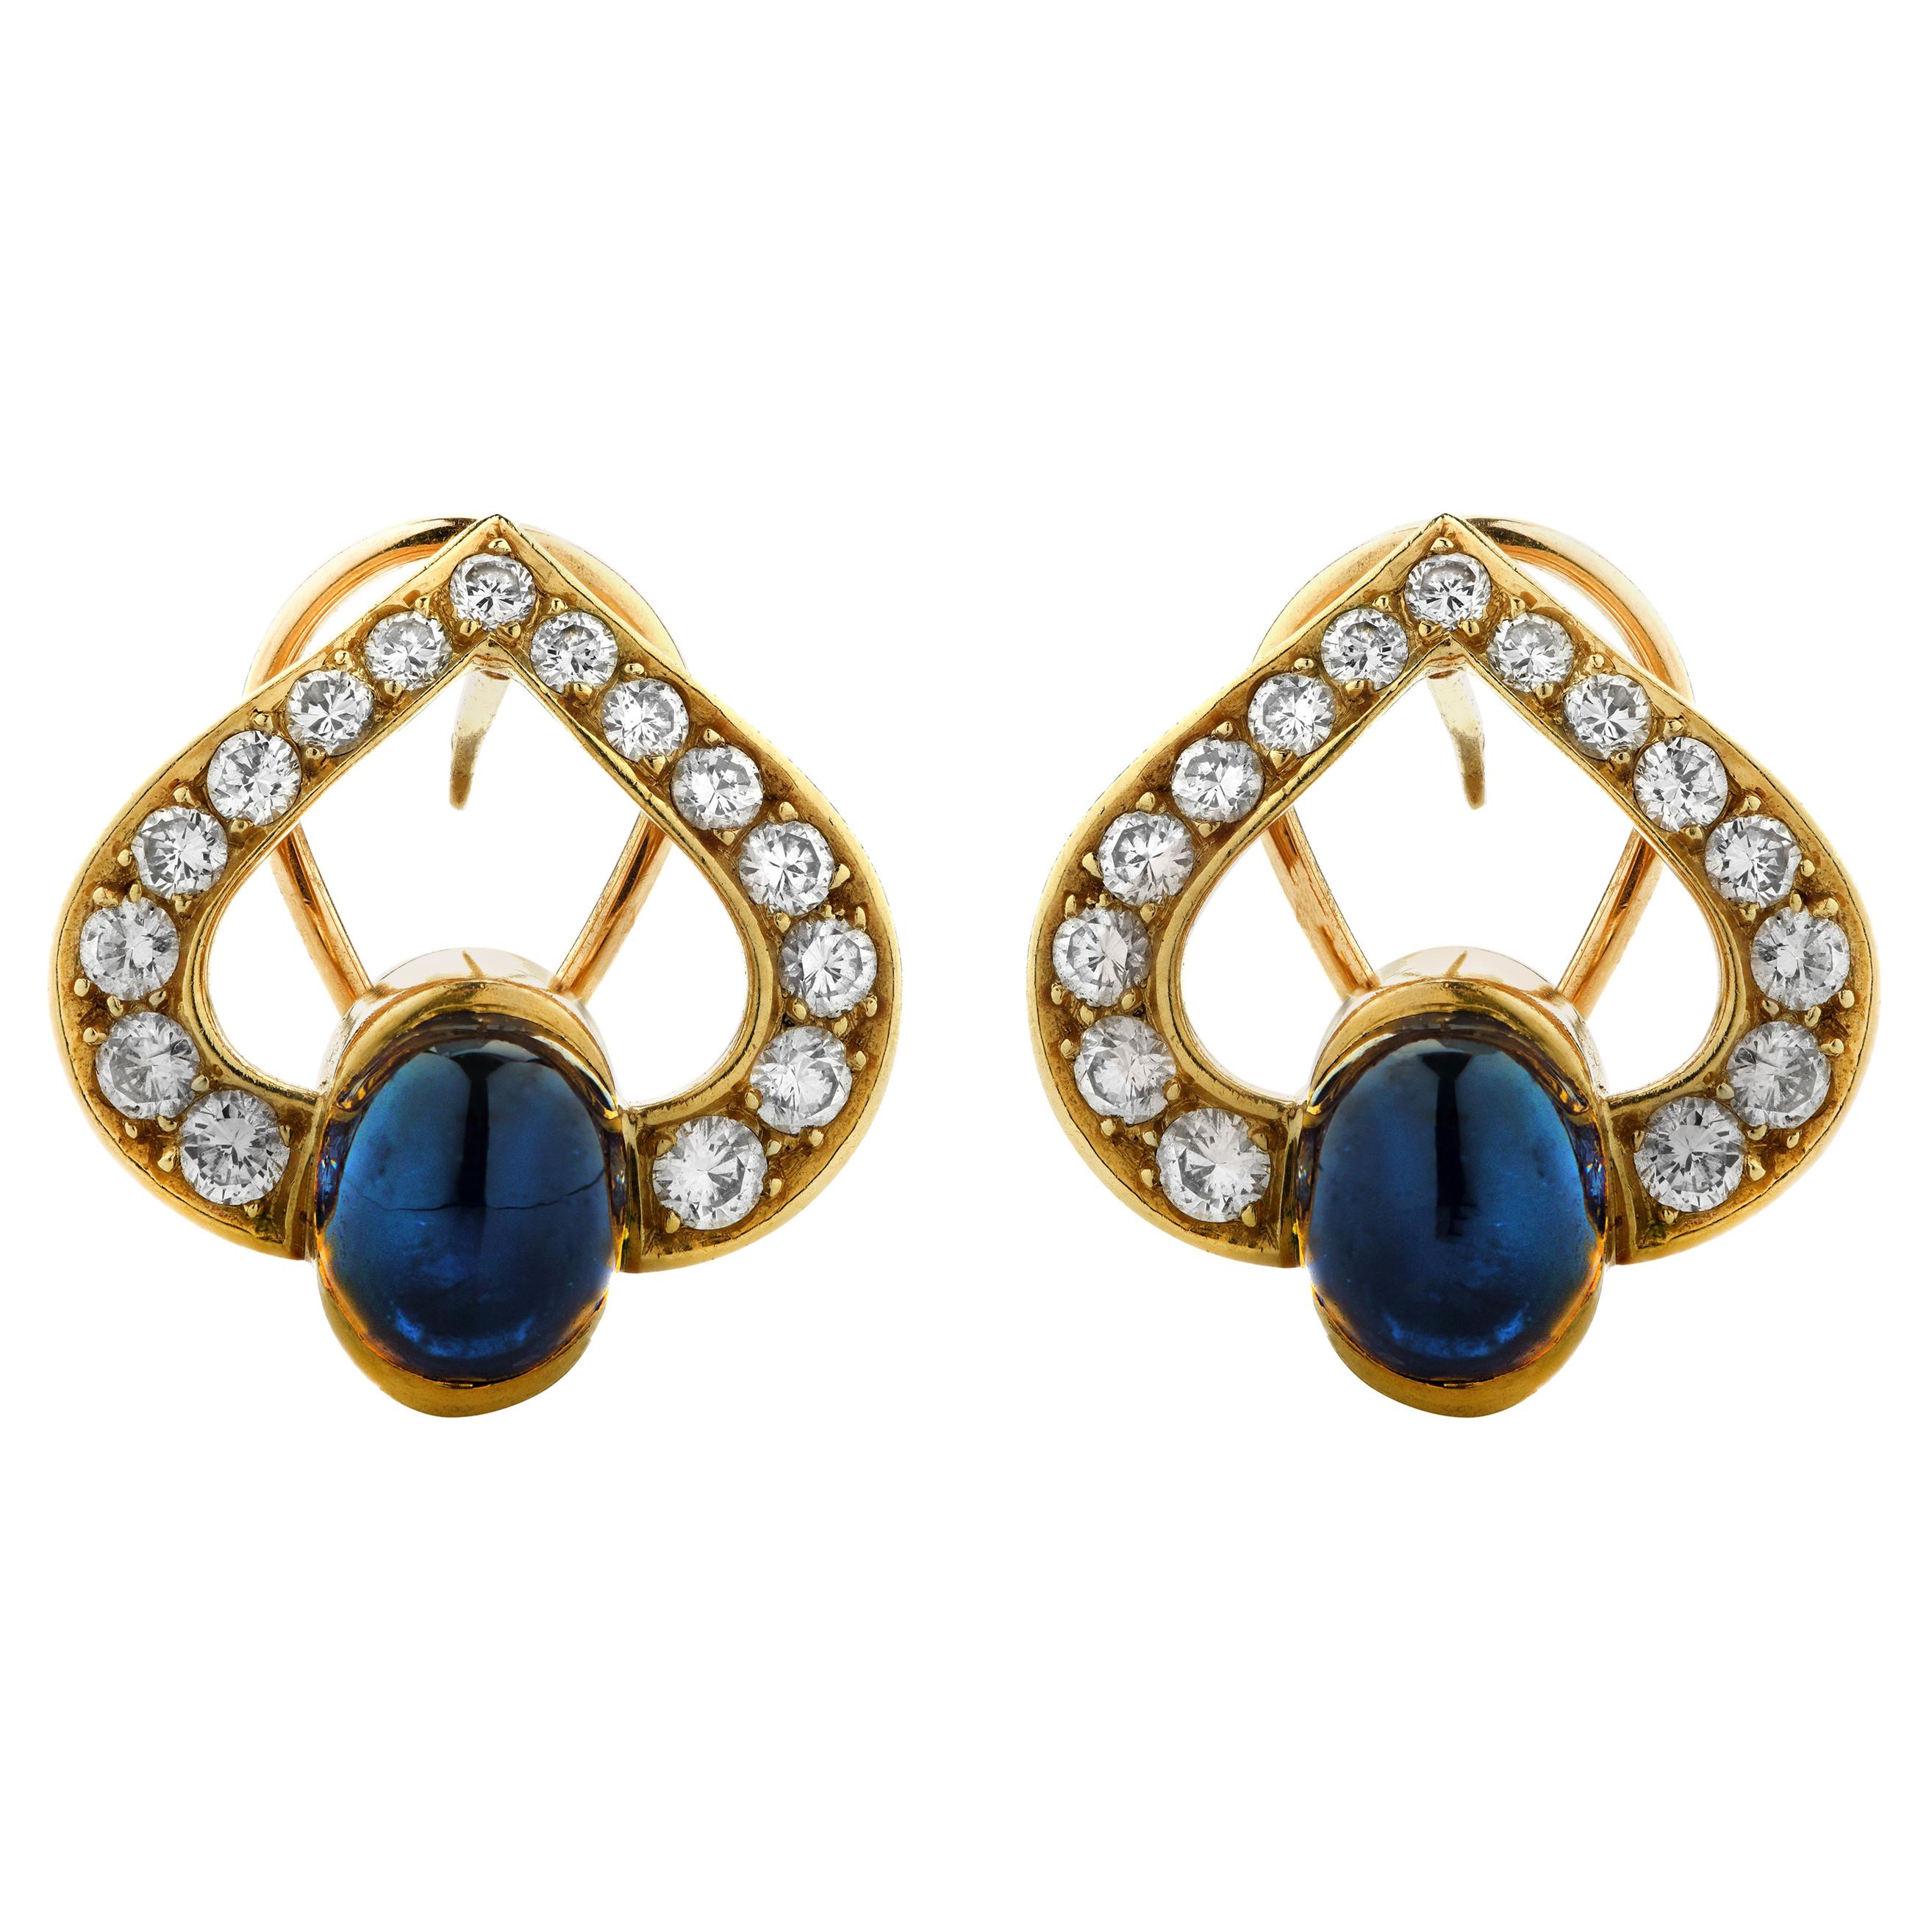 French Sapphire and Diamond Earrings